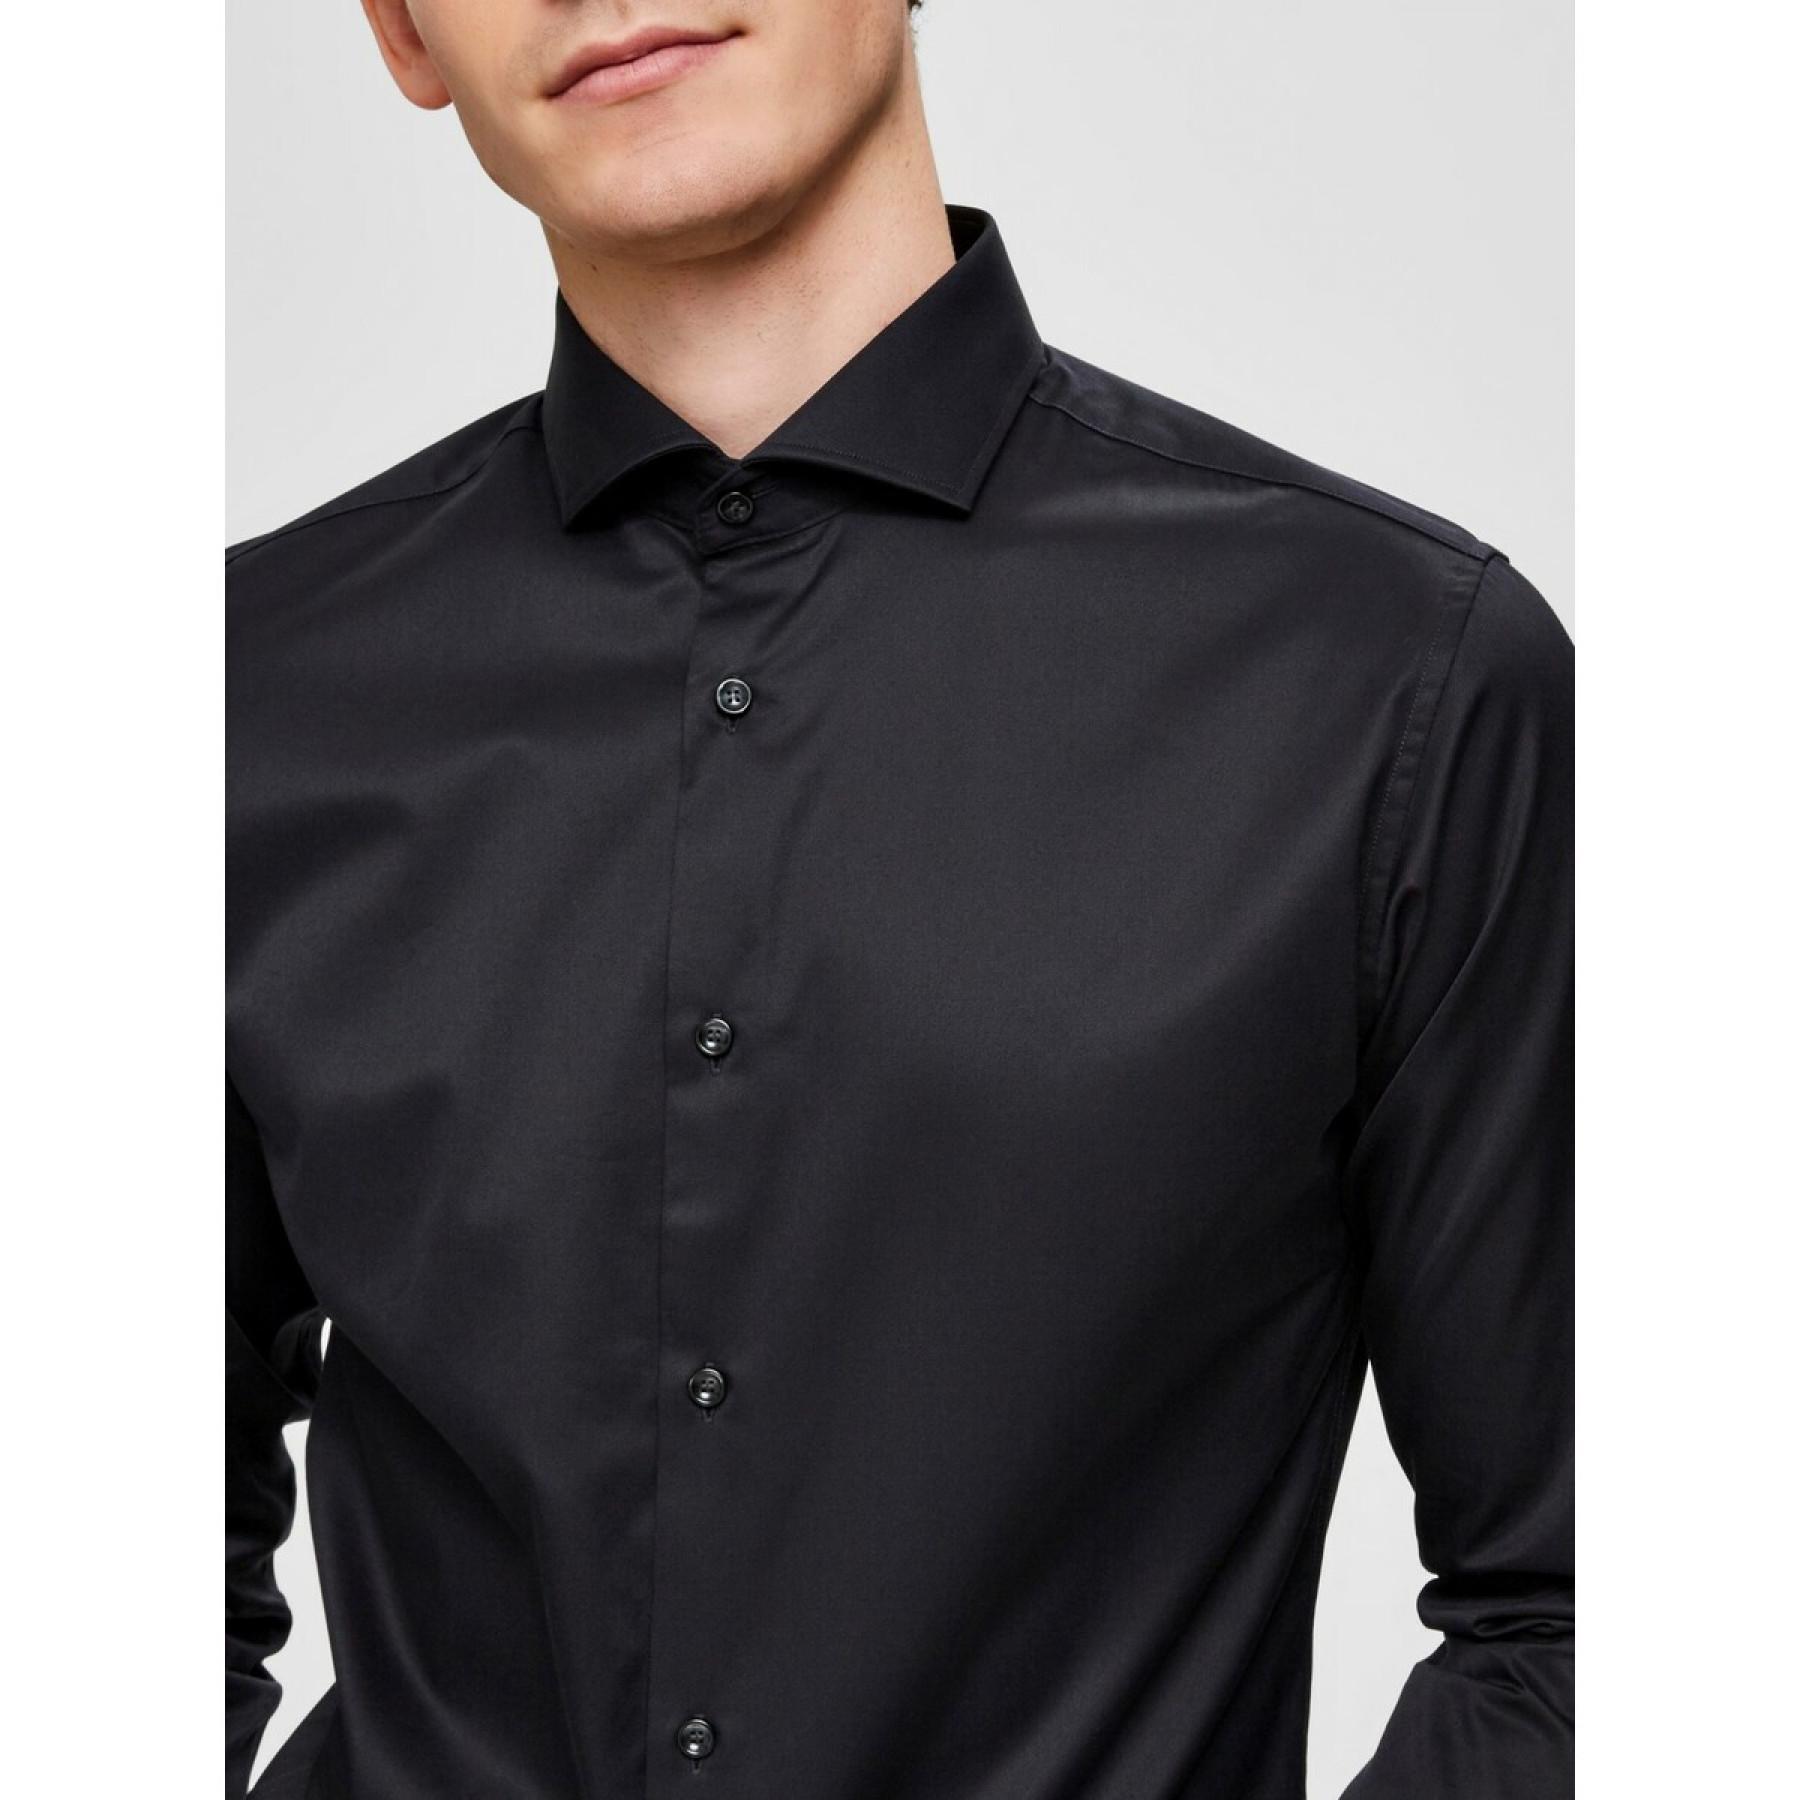 Chemise Selected Sel-pelle manches longues slim